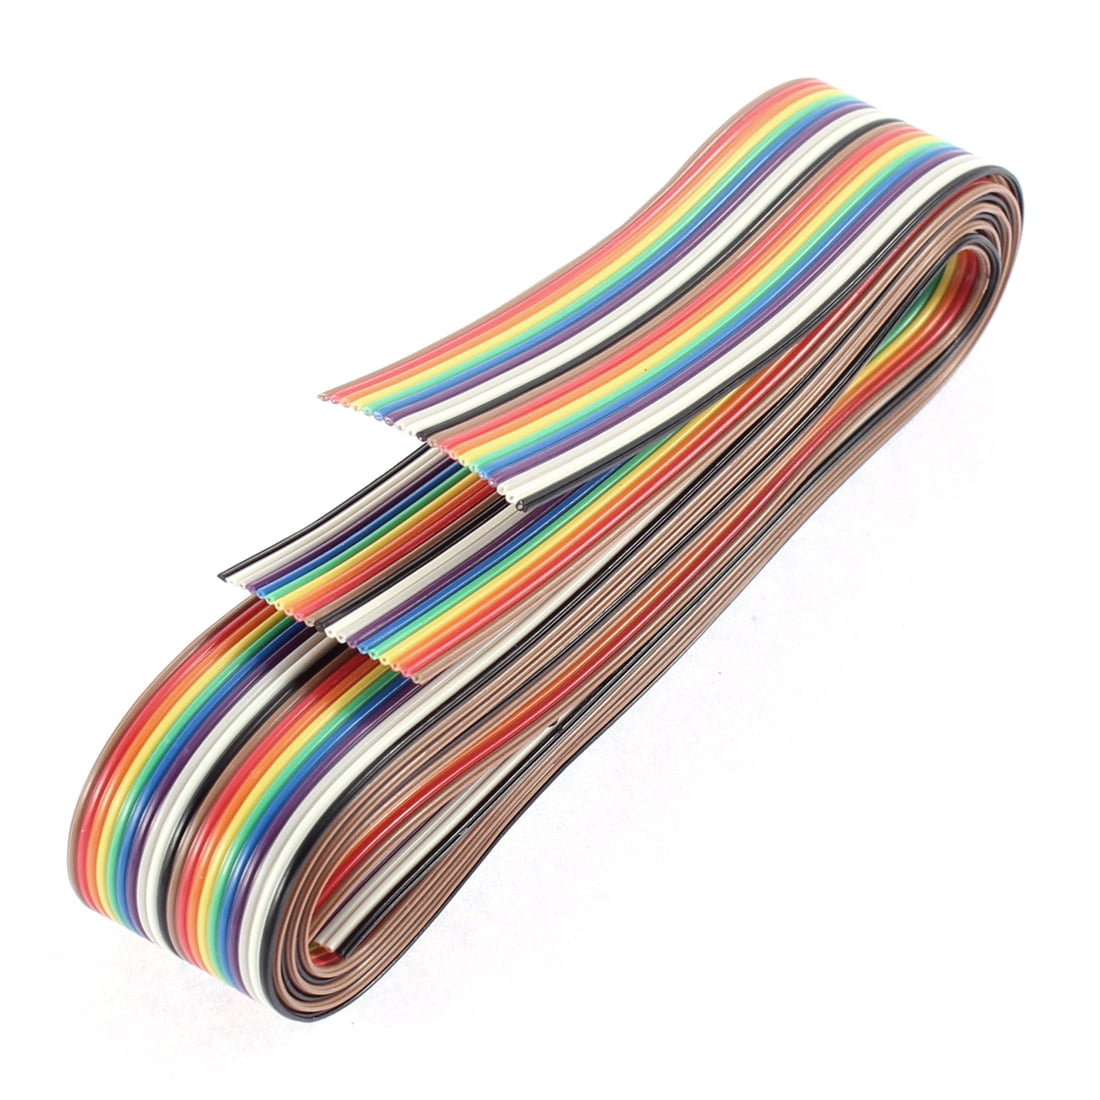 Flat Ribbon Cable 6P Rainbow IDC Wire 1.27mm Pitch 5m Long 